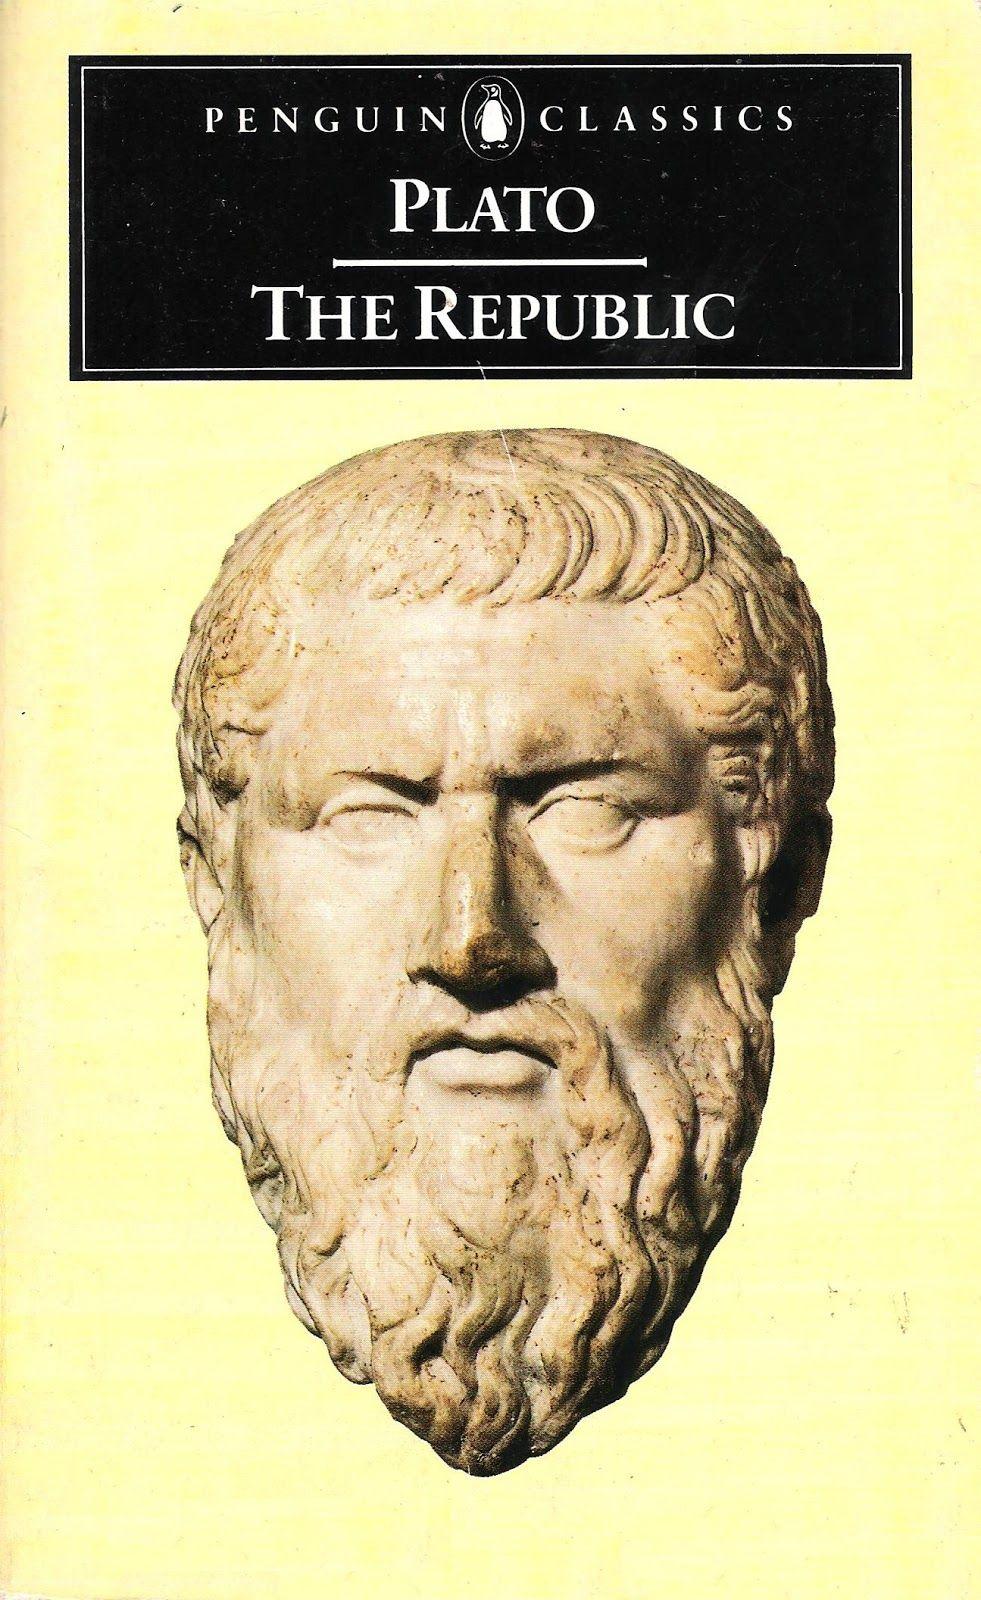 In his book The Republic, Plato described his vision of an ideal state He rejected Athenian democracy because it had condemned Socrates just as it